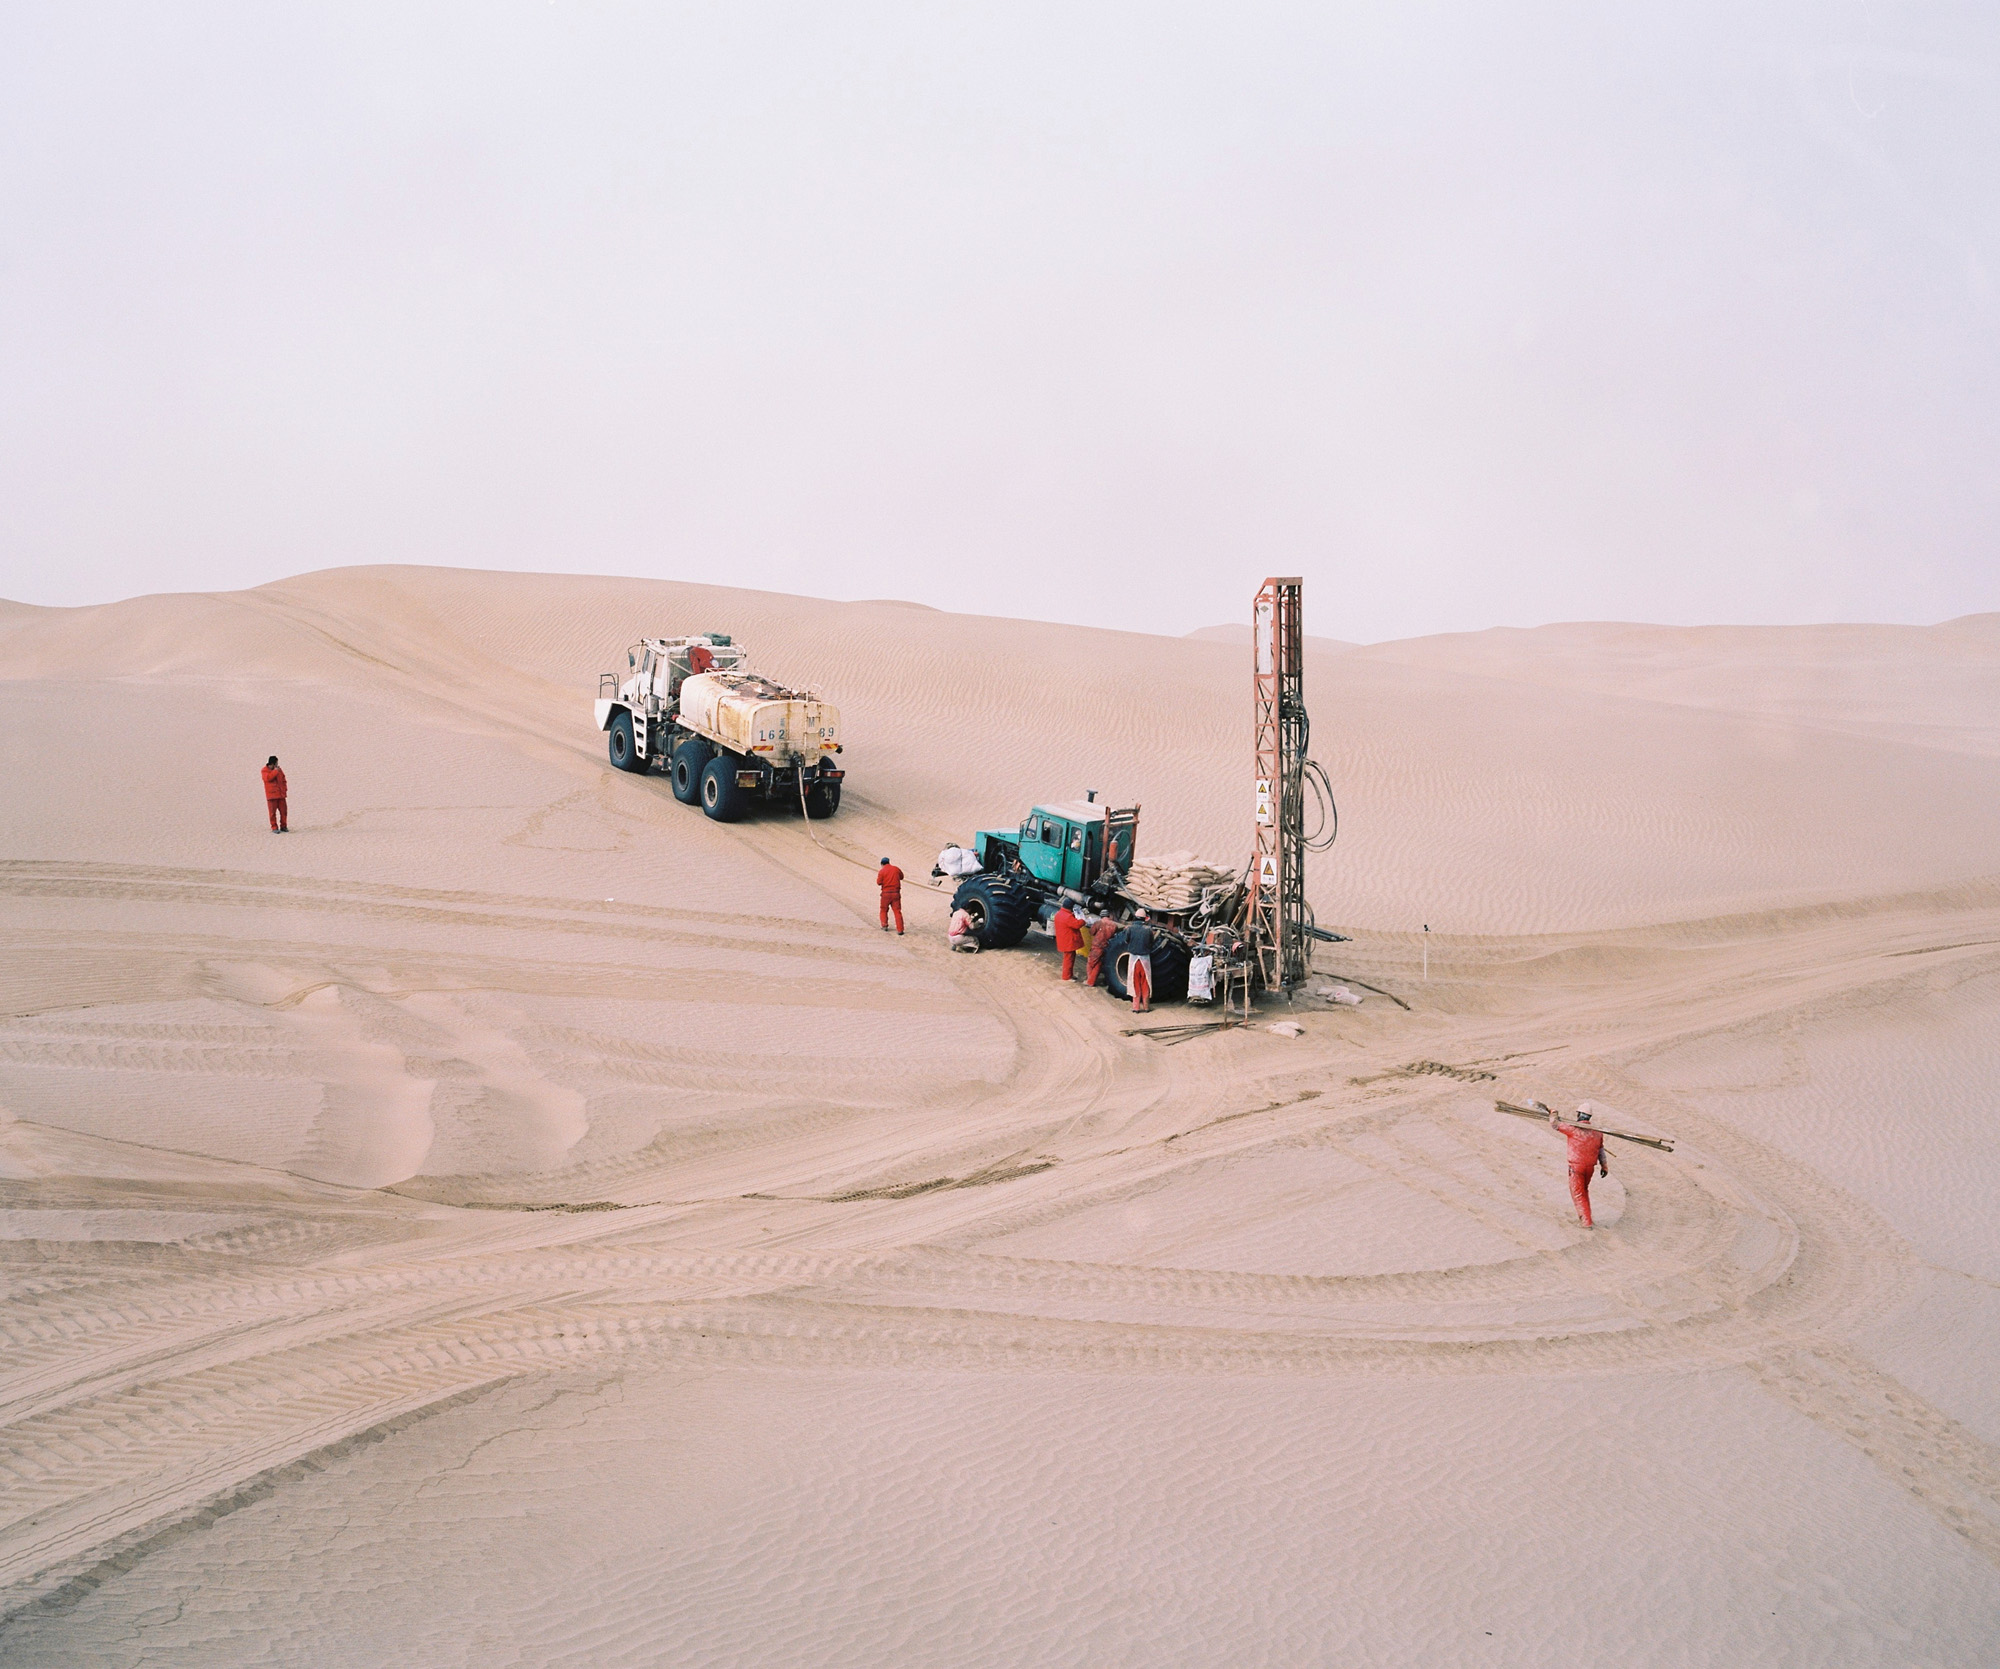 Oil exploration team from CNPC - China National Petroleum Corporation - operating in the Taklamakan desert in the province of Xinjiang. This team and a few others are setting up thousands of explosive charges for weeks at a time that are all detonated at sthe same time to detect oil fields.